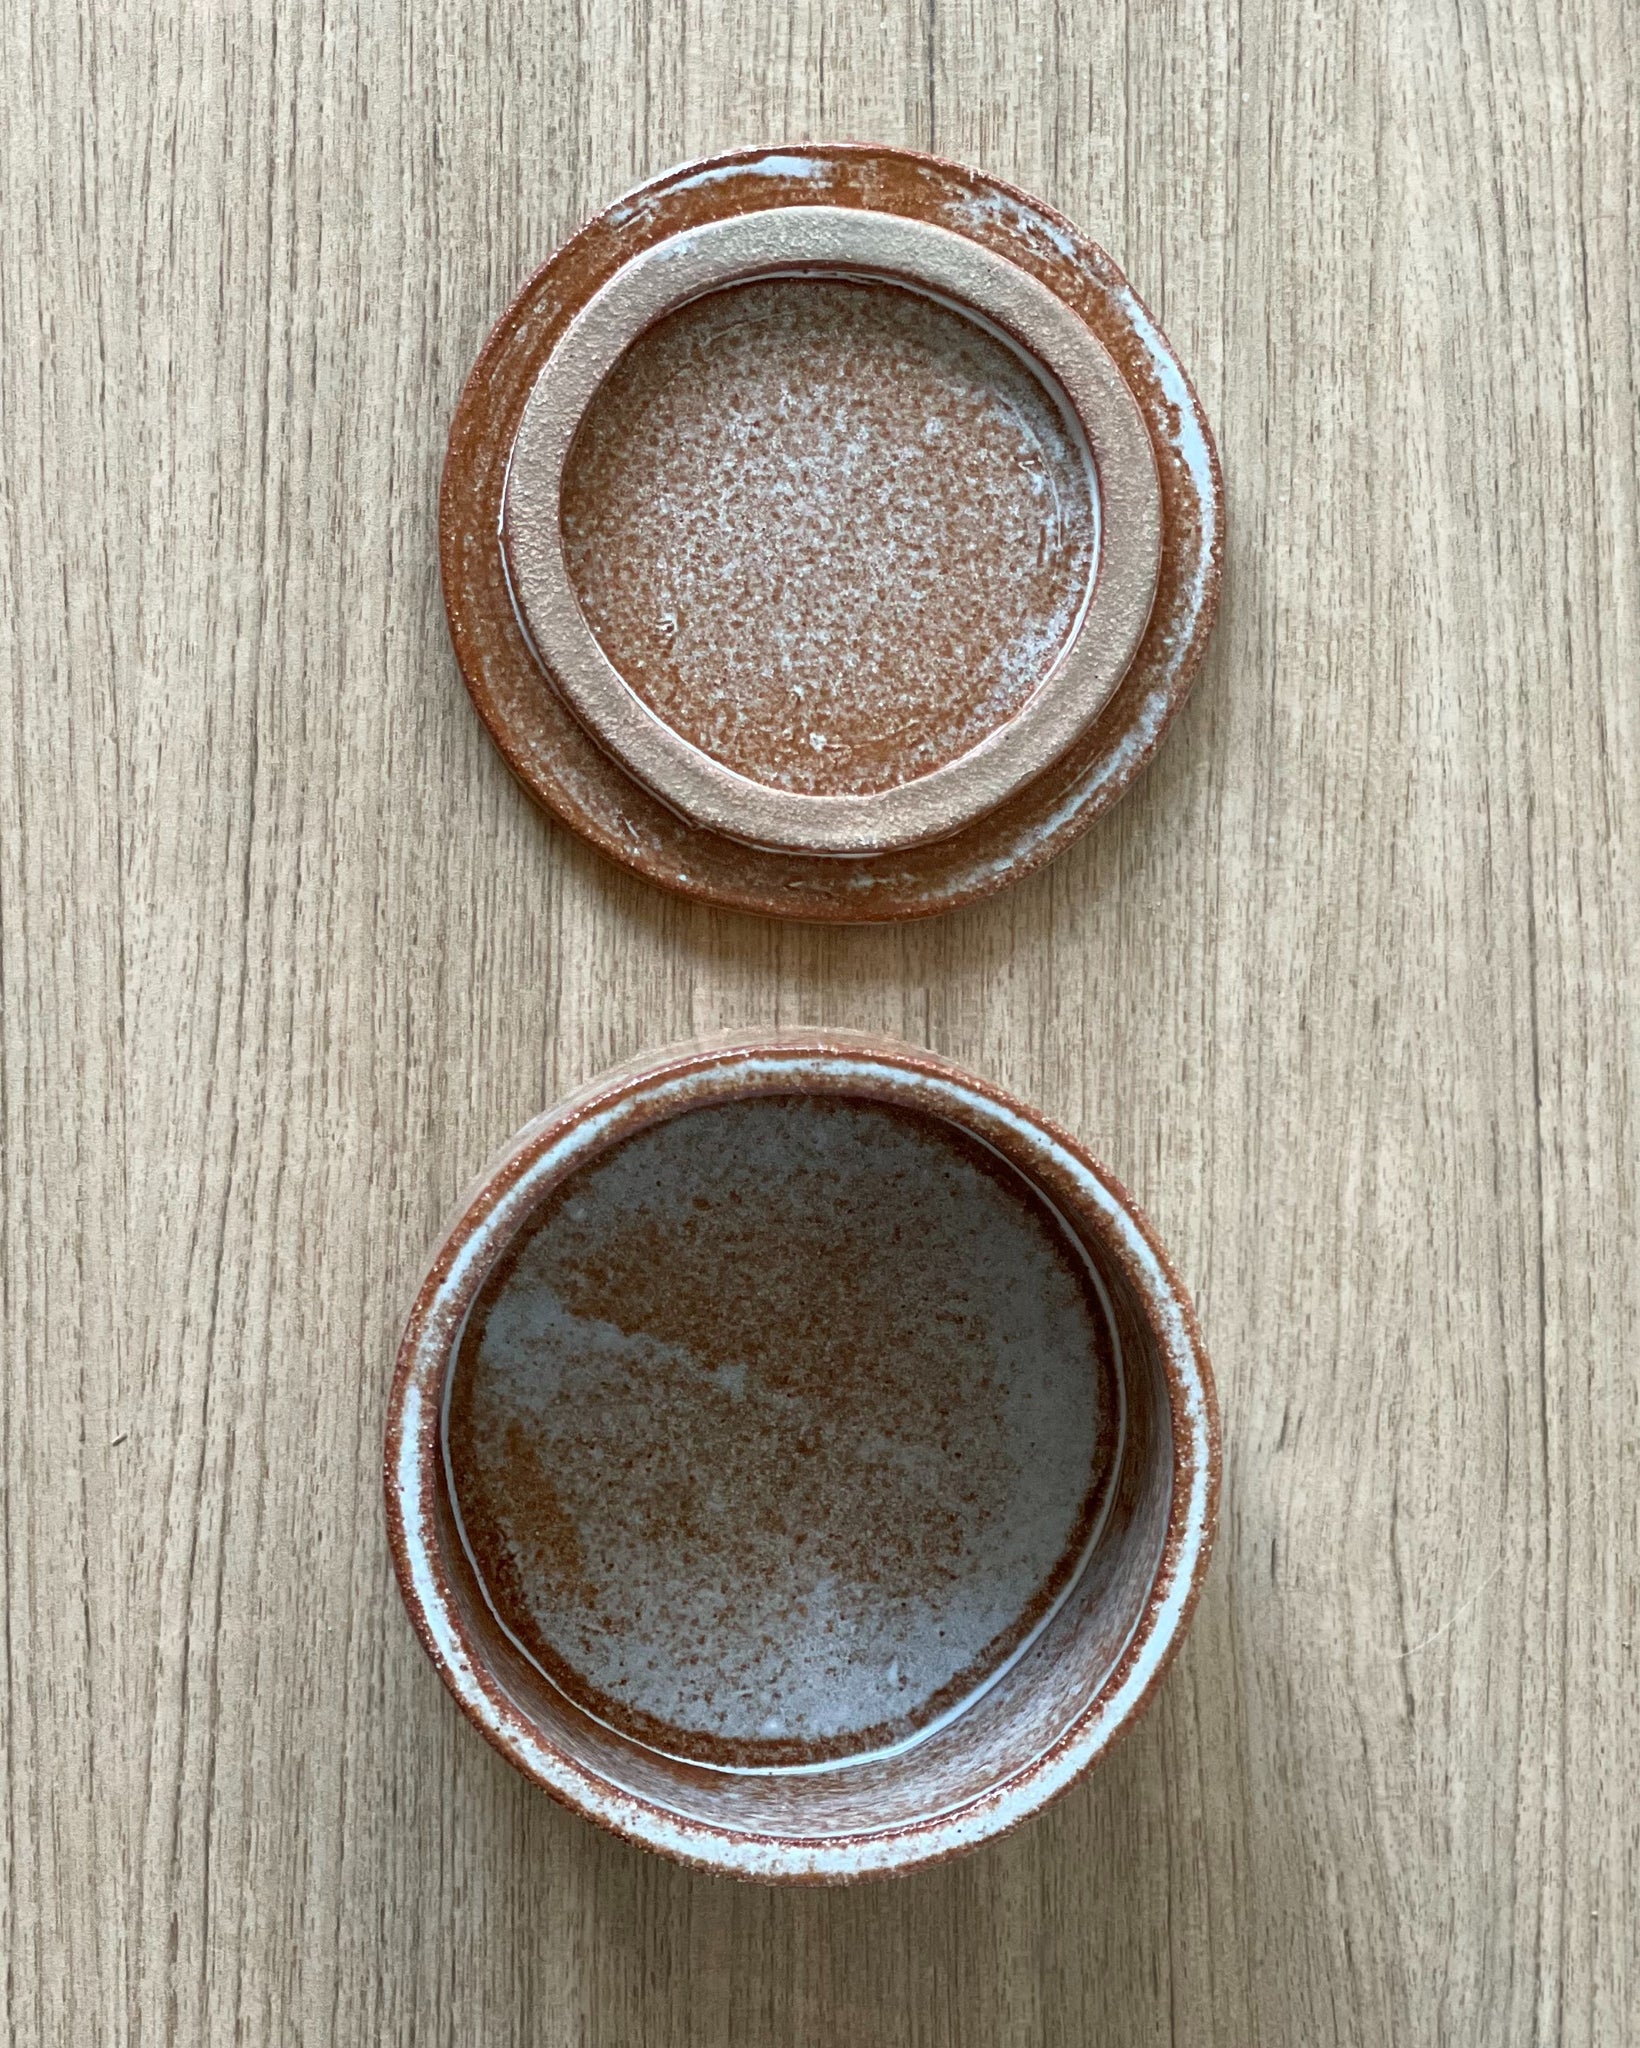 caramel lidded container